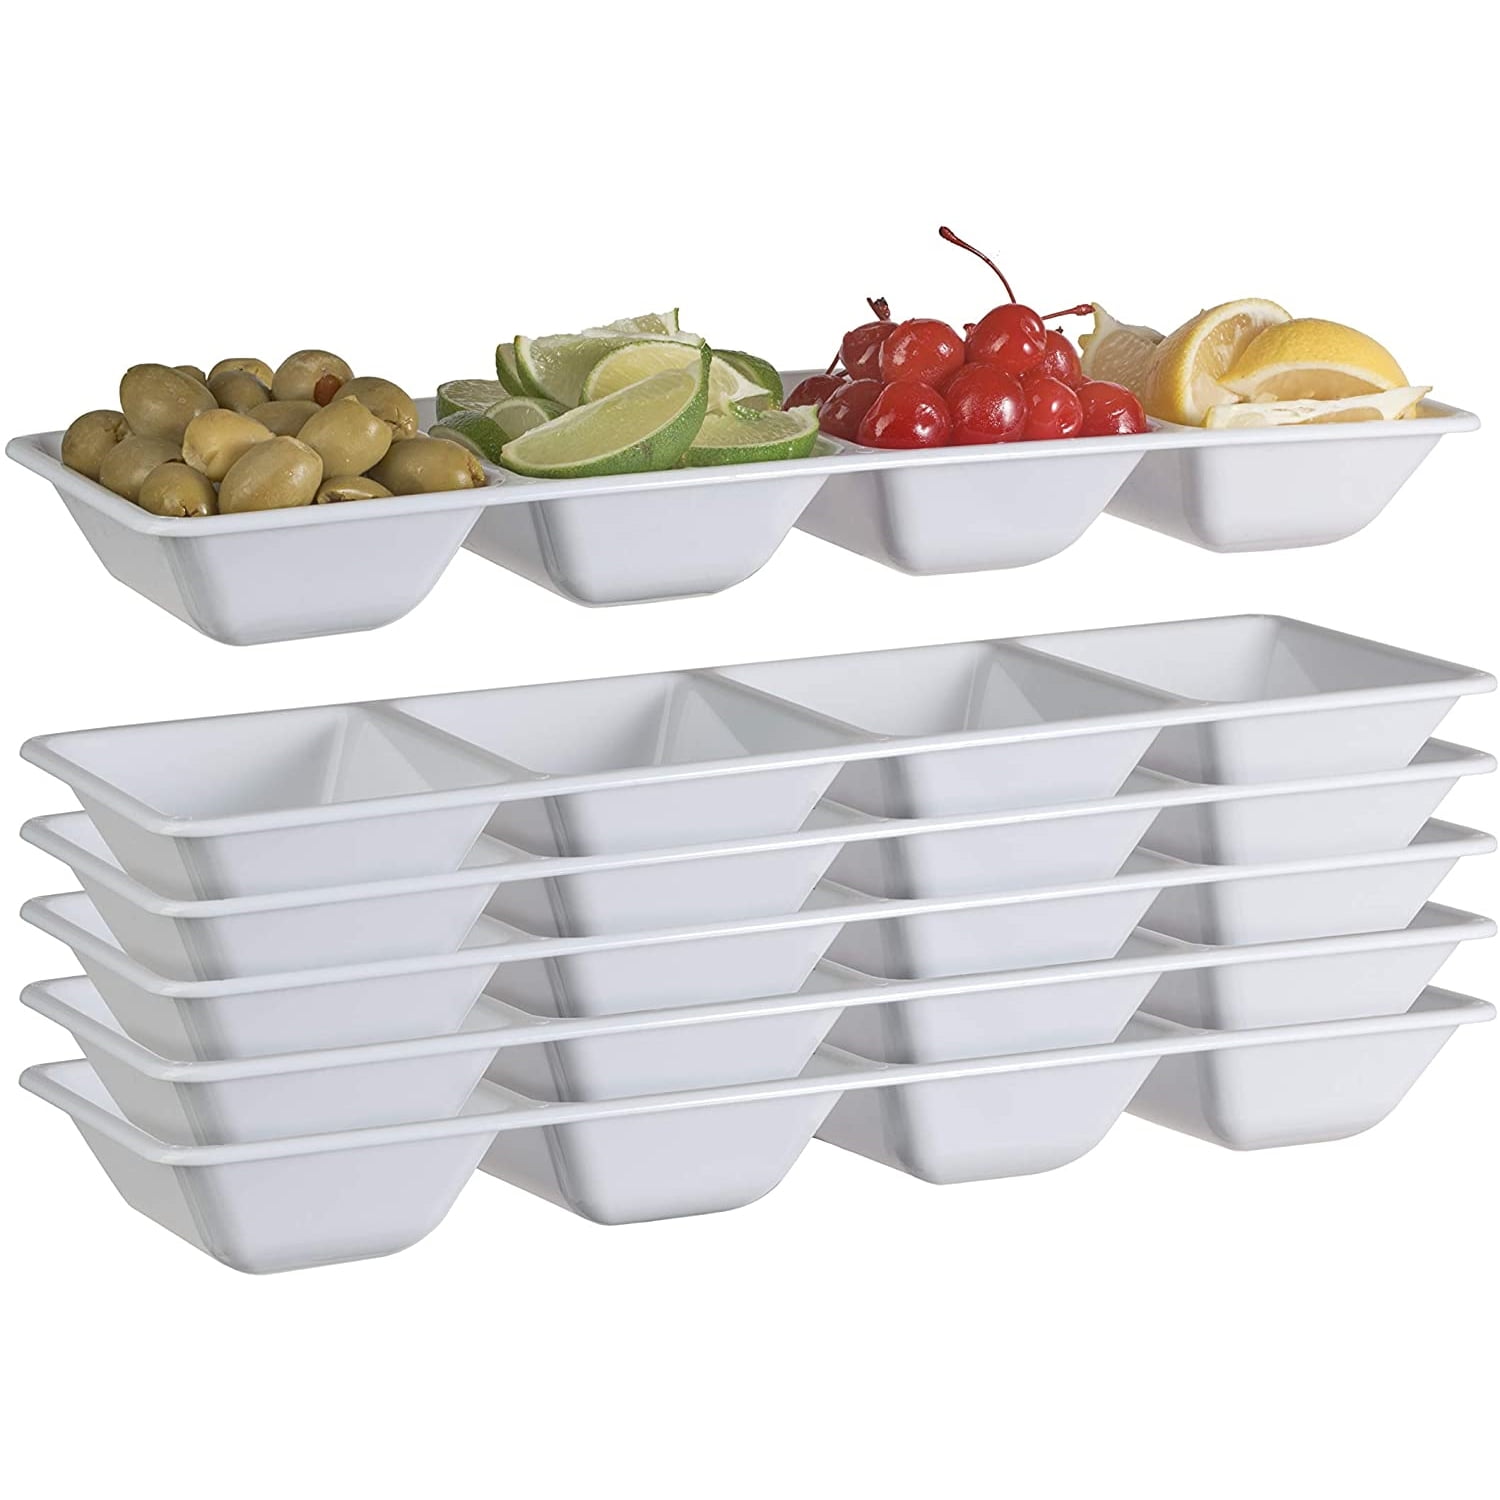 Plastic Portion/Sectional Lunch Or Dinner Trays Food Safe 14" x 10" 